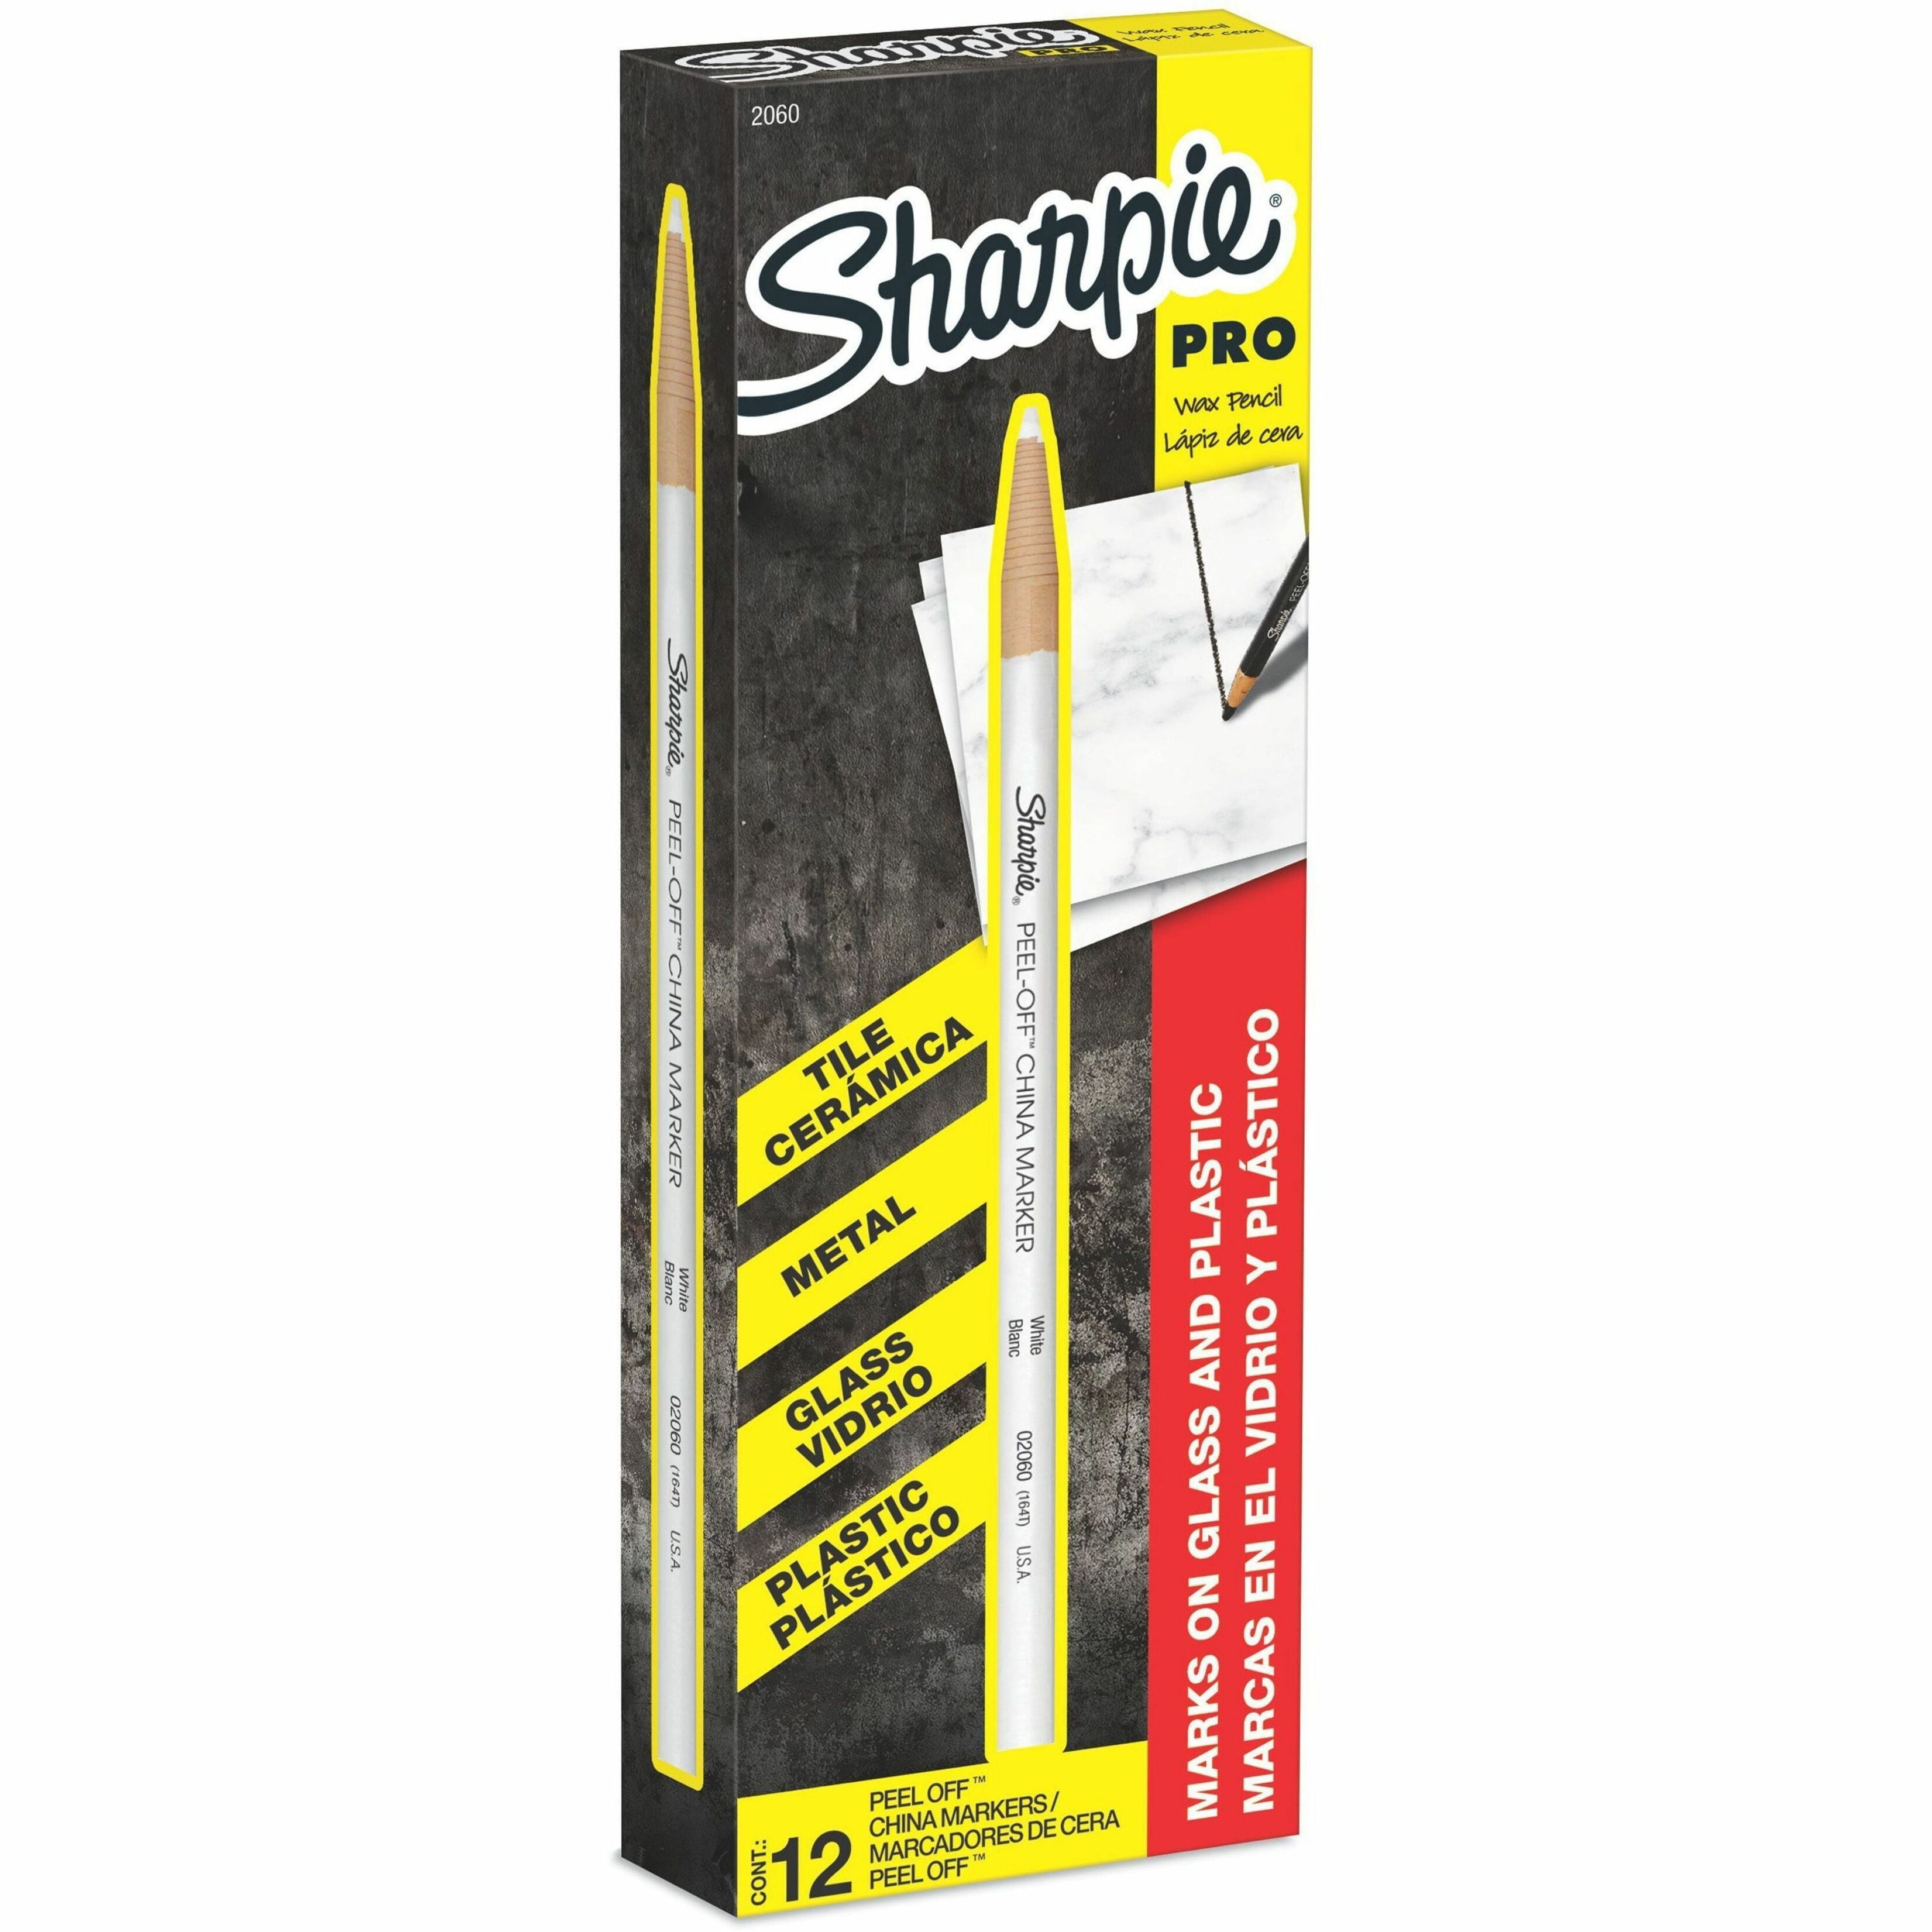 Sharpie Peel-Off China Marker - Black Grease Pencil